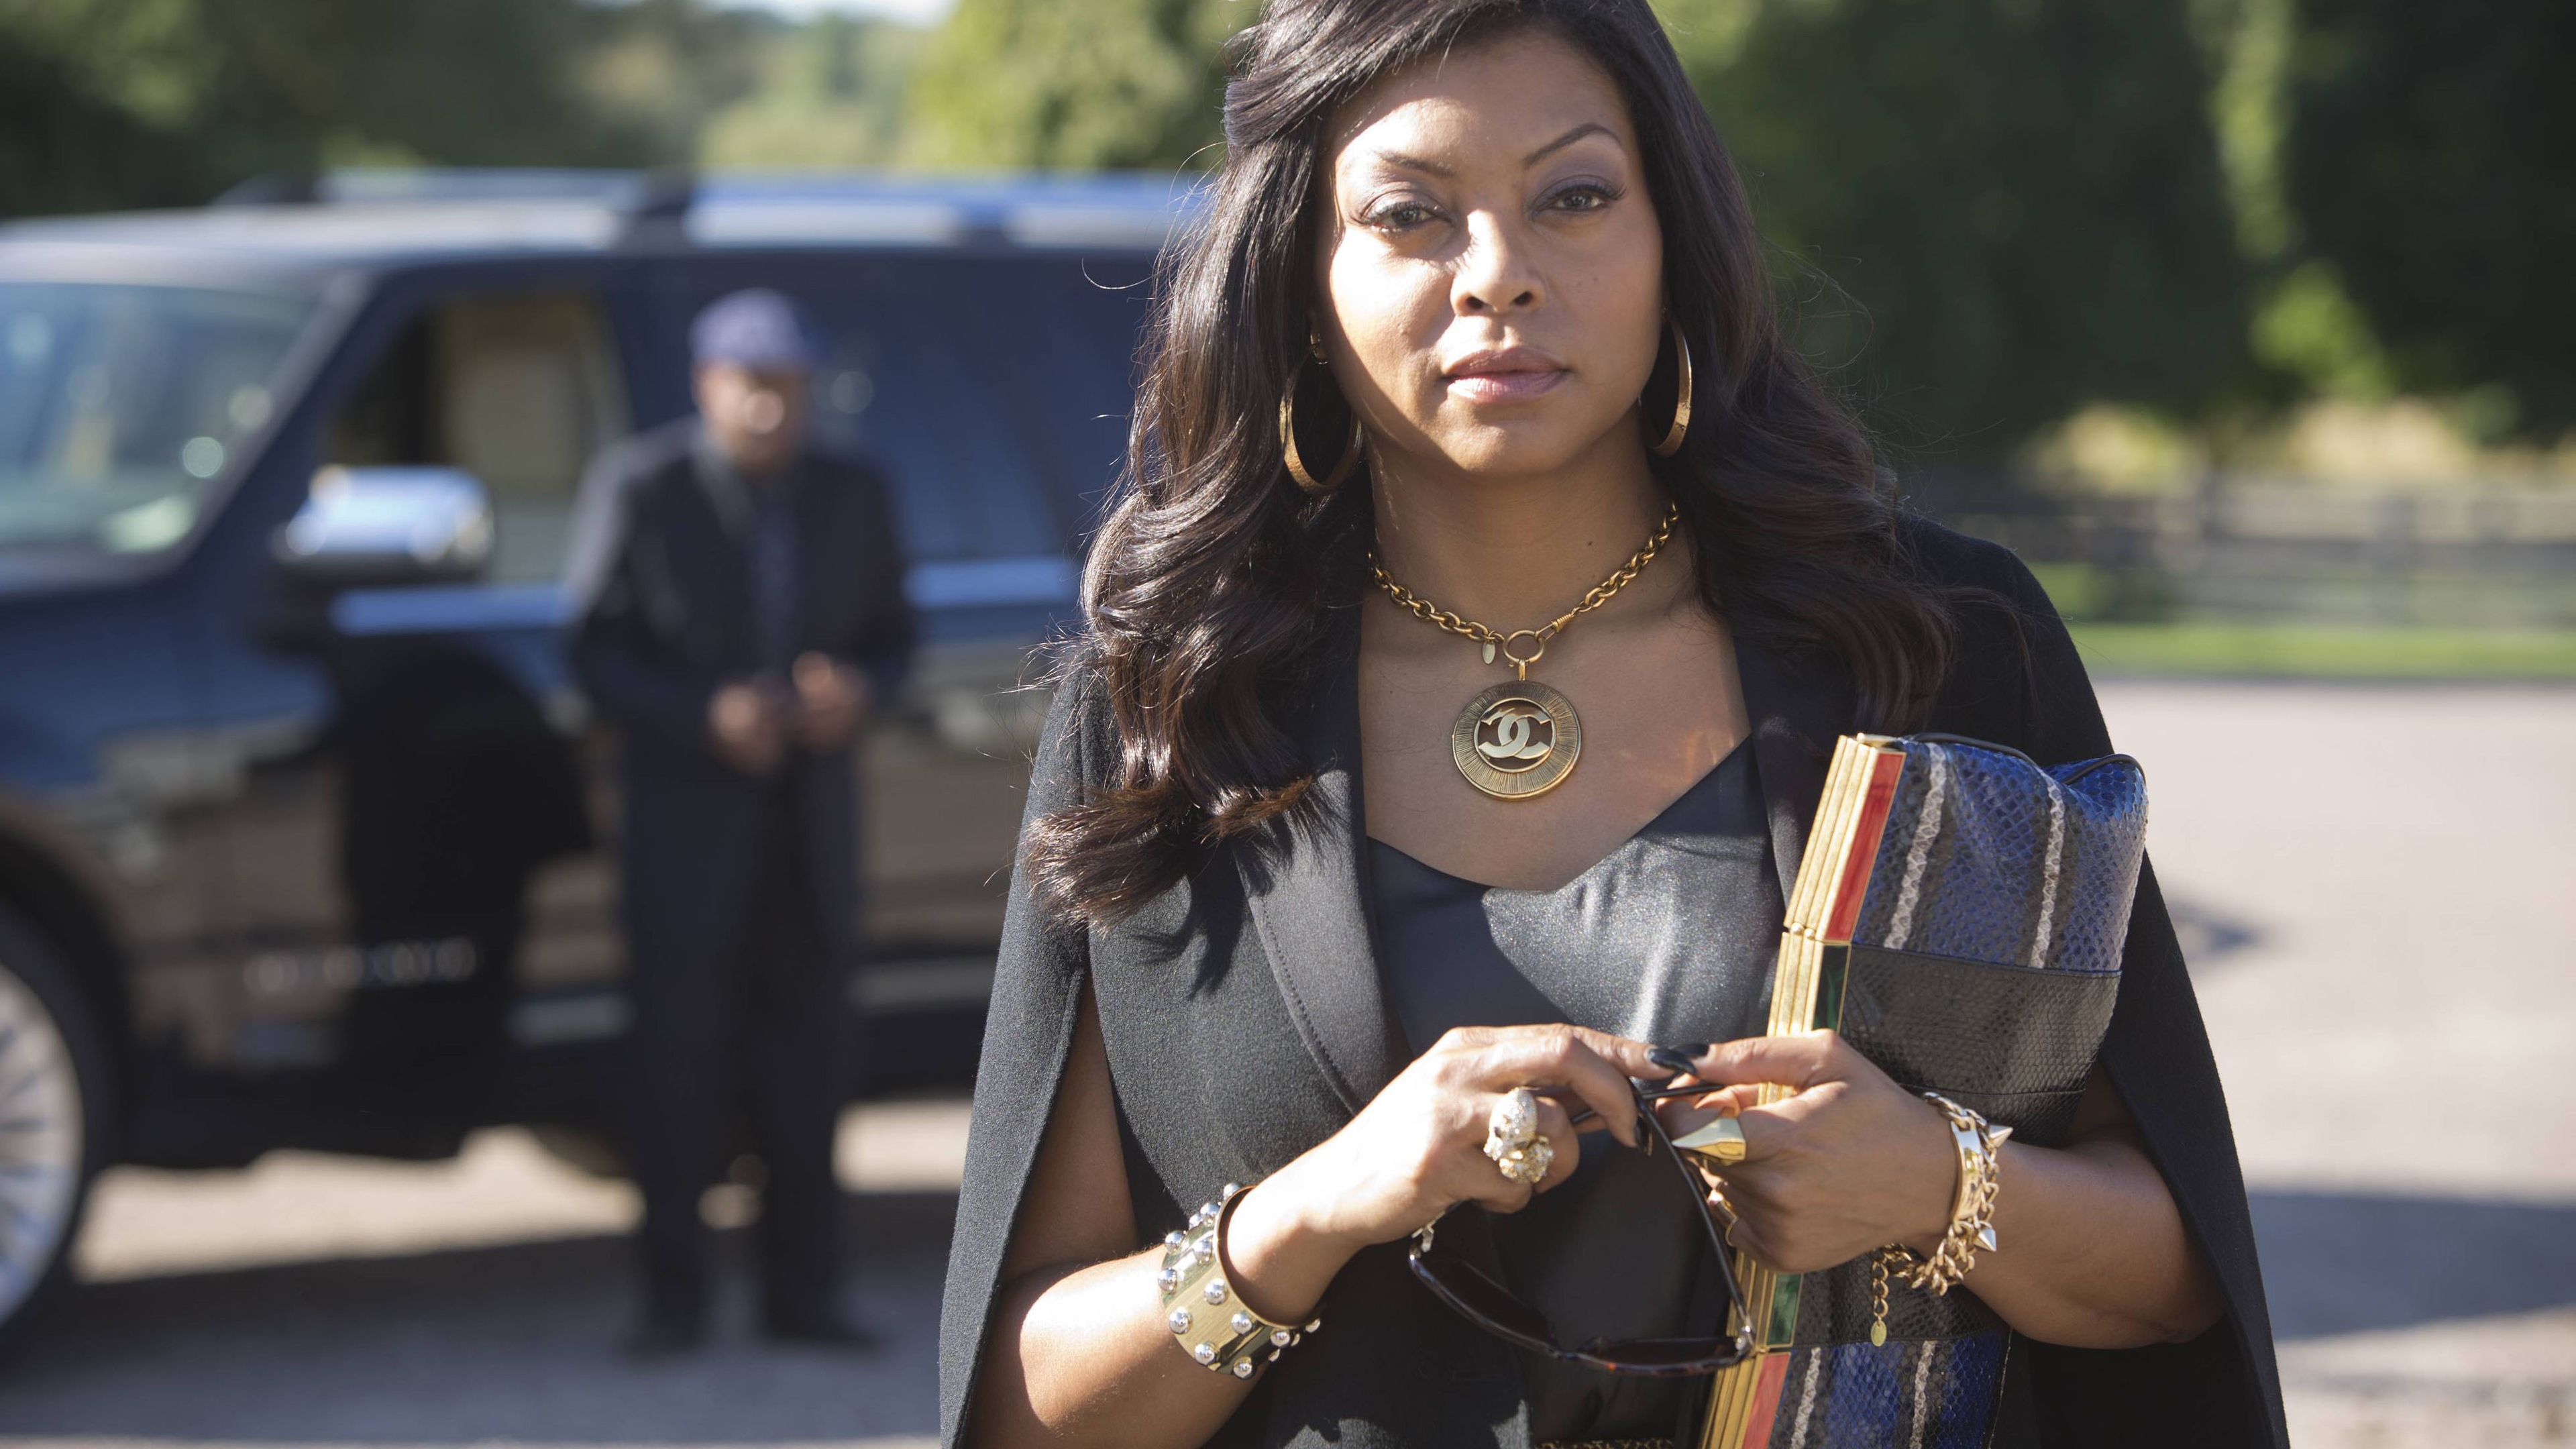 Empire Cookie Lyon for 3840 x 2160 Ultra HD resolution